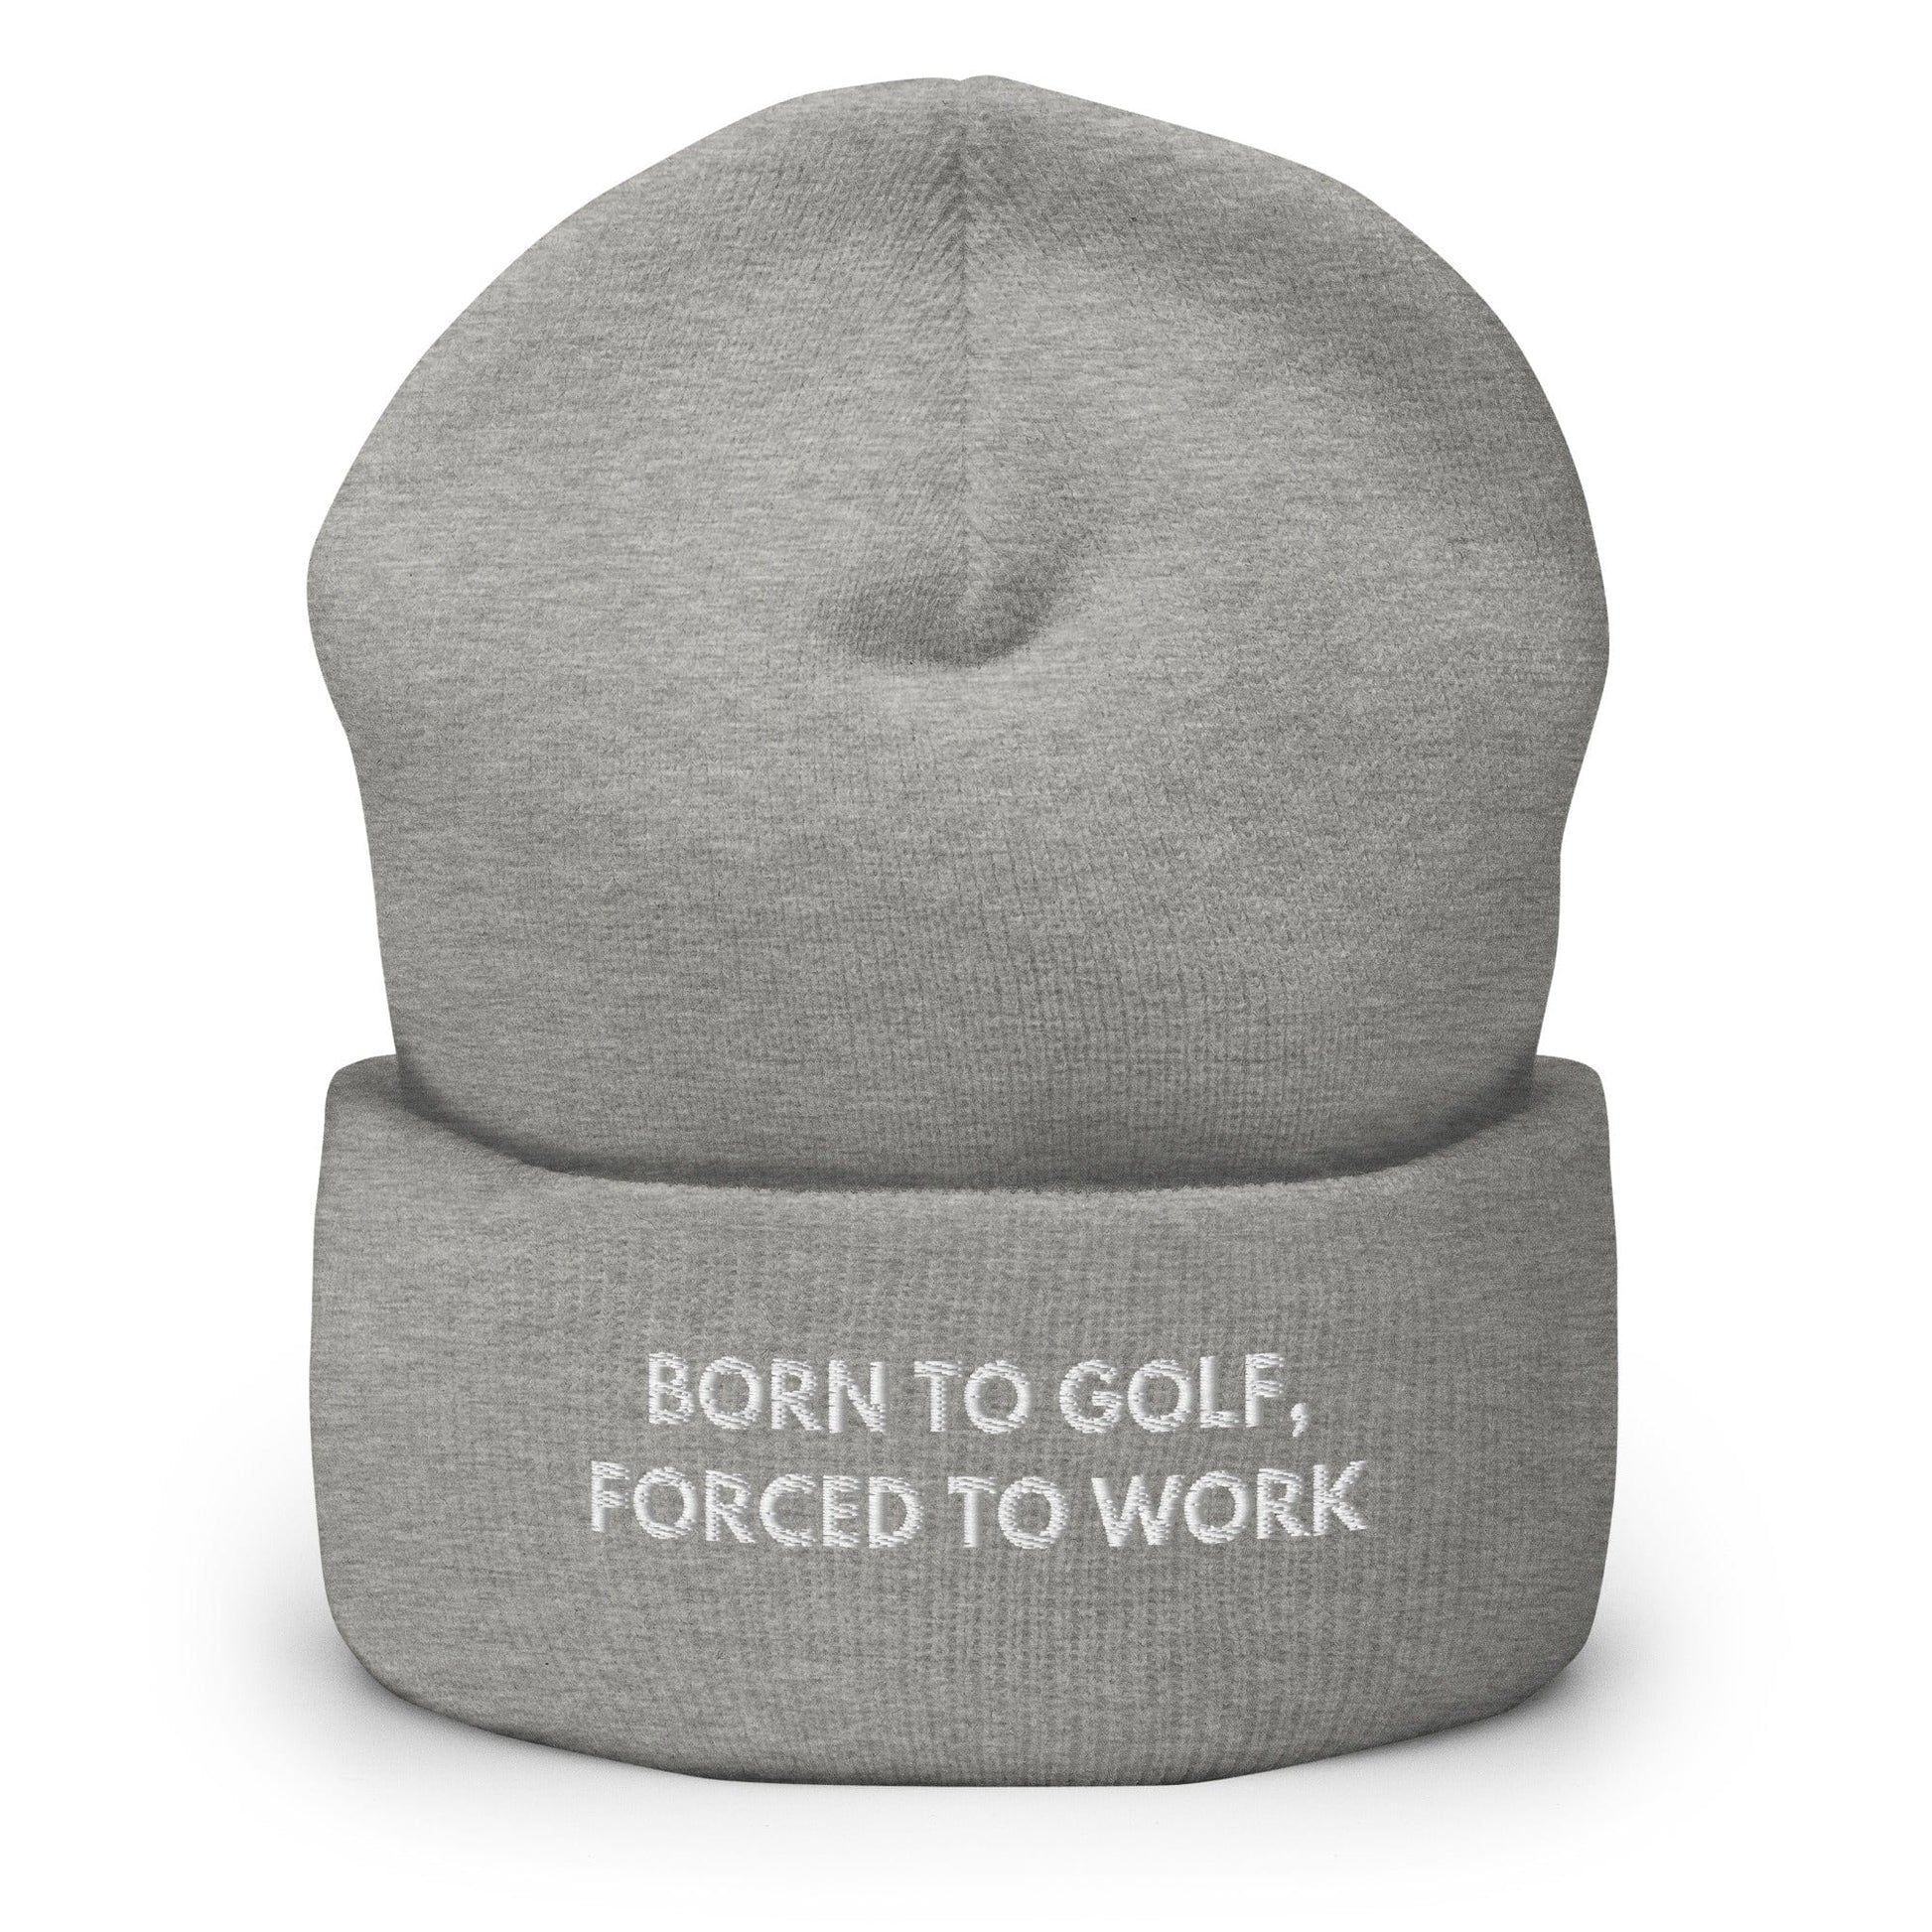 Funny Golfer Gifts  Beanie Heather Grey Born to Golf, Forced To Work Hat Beanie